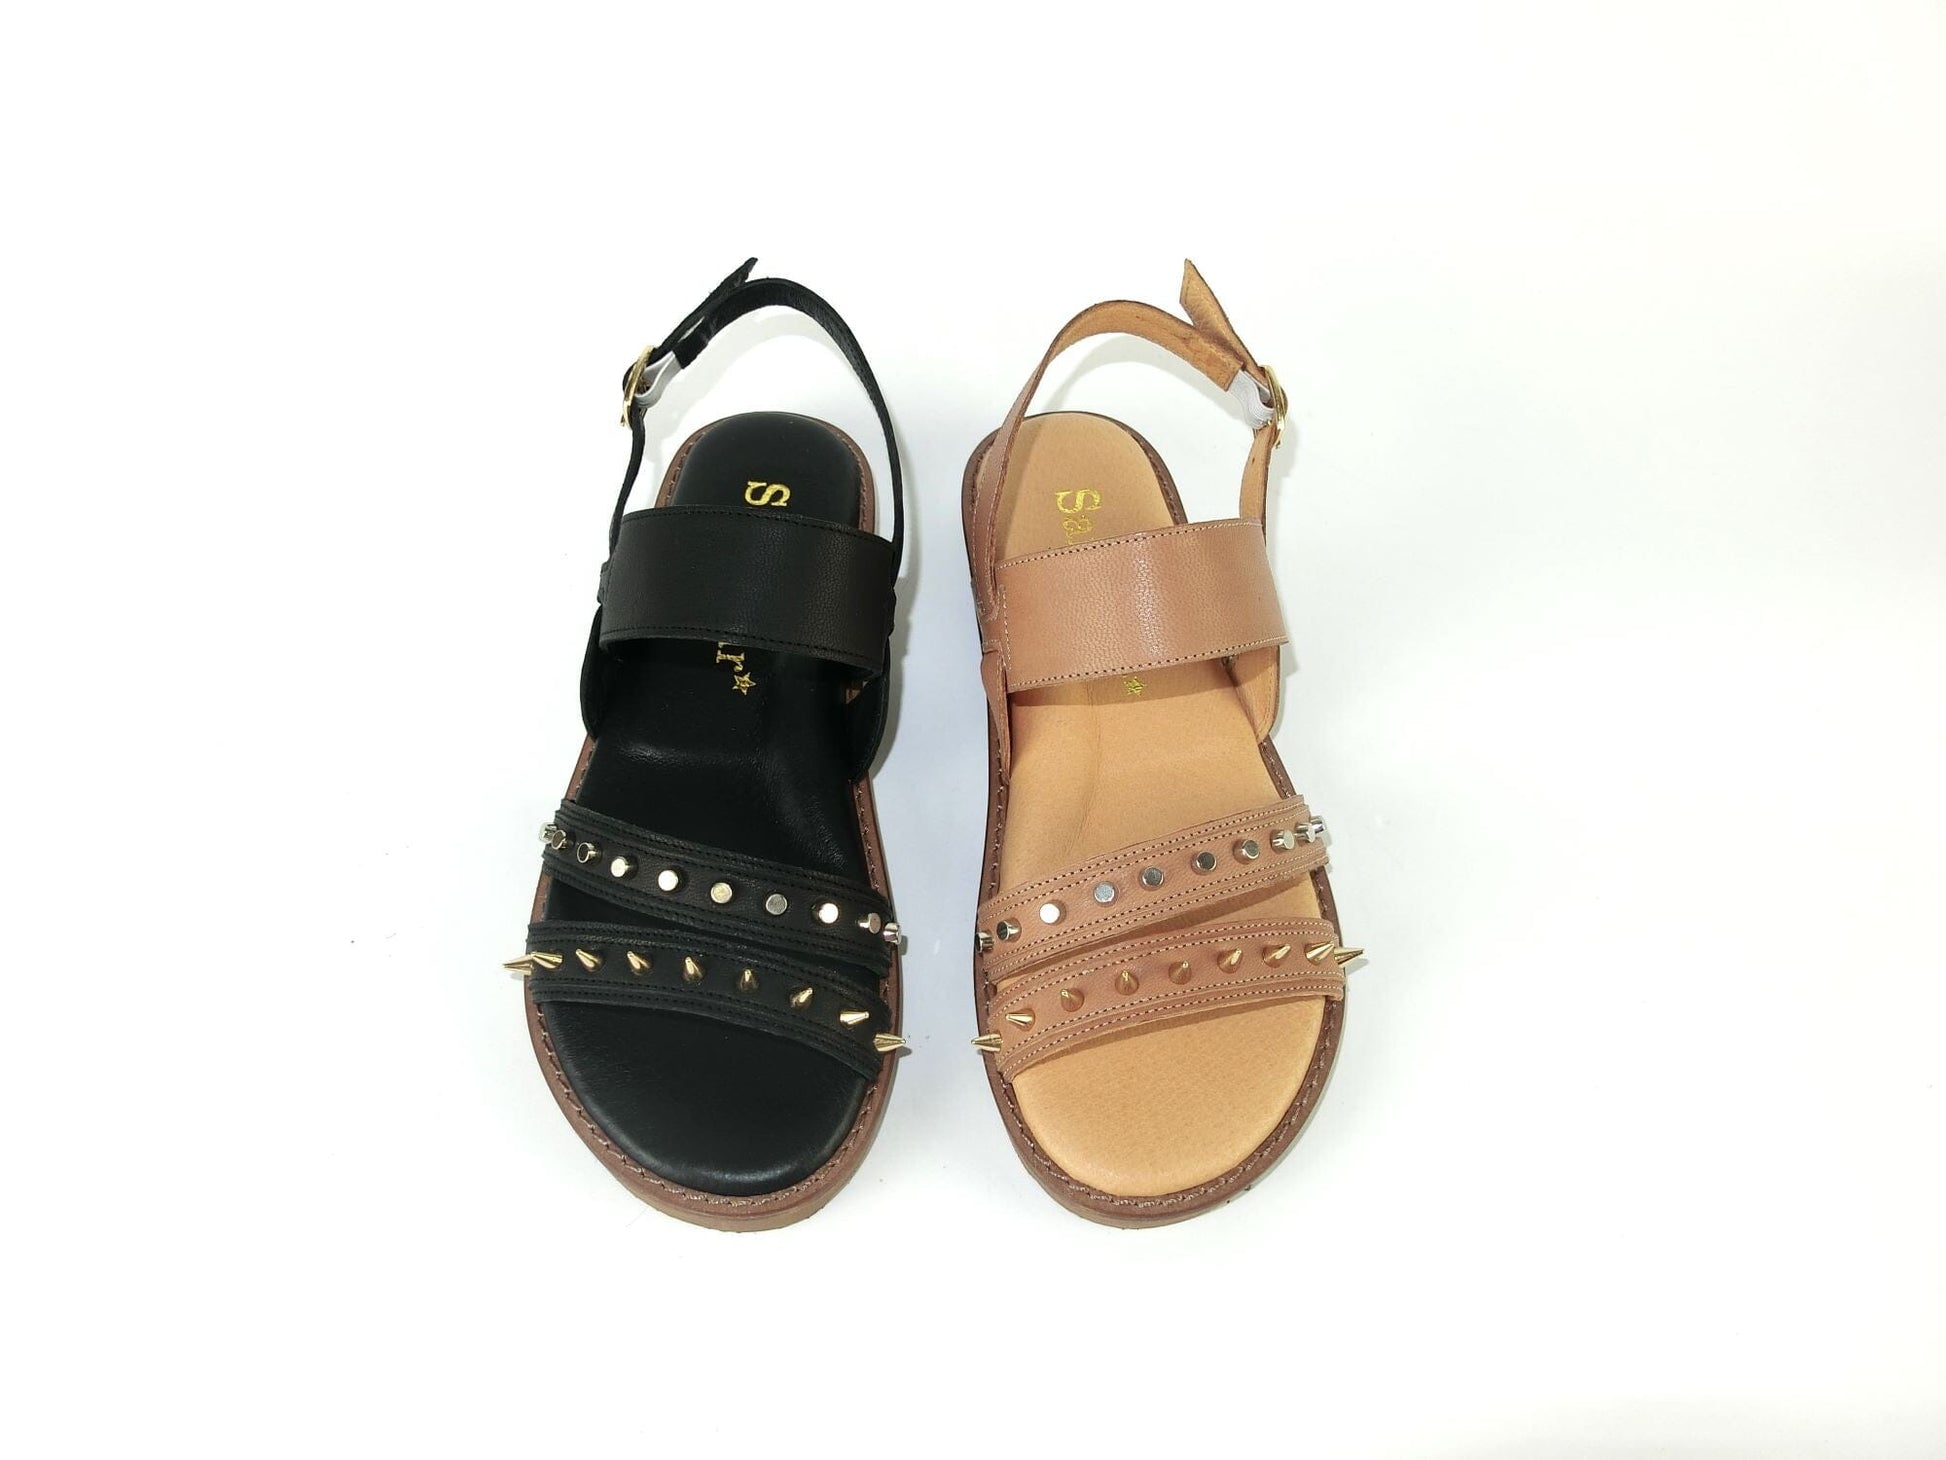 SS22018/19 Leather flat sandals with studs detail Sam Star Shoes 